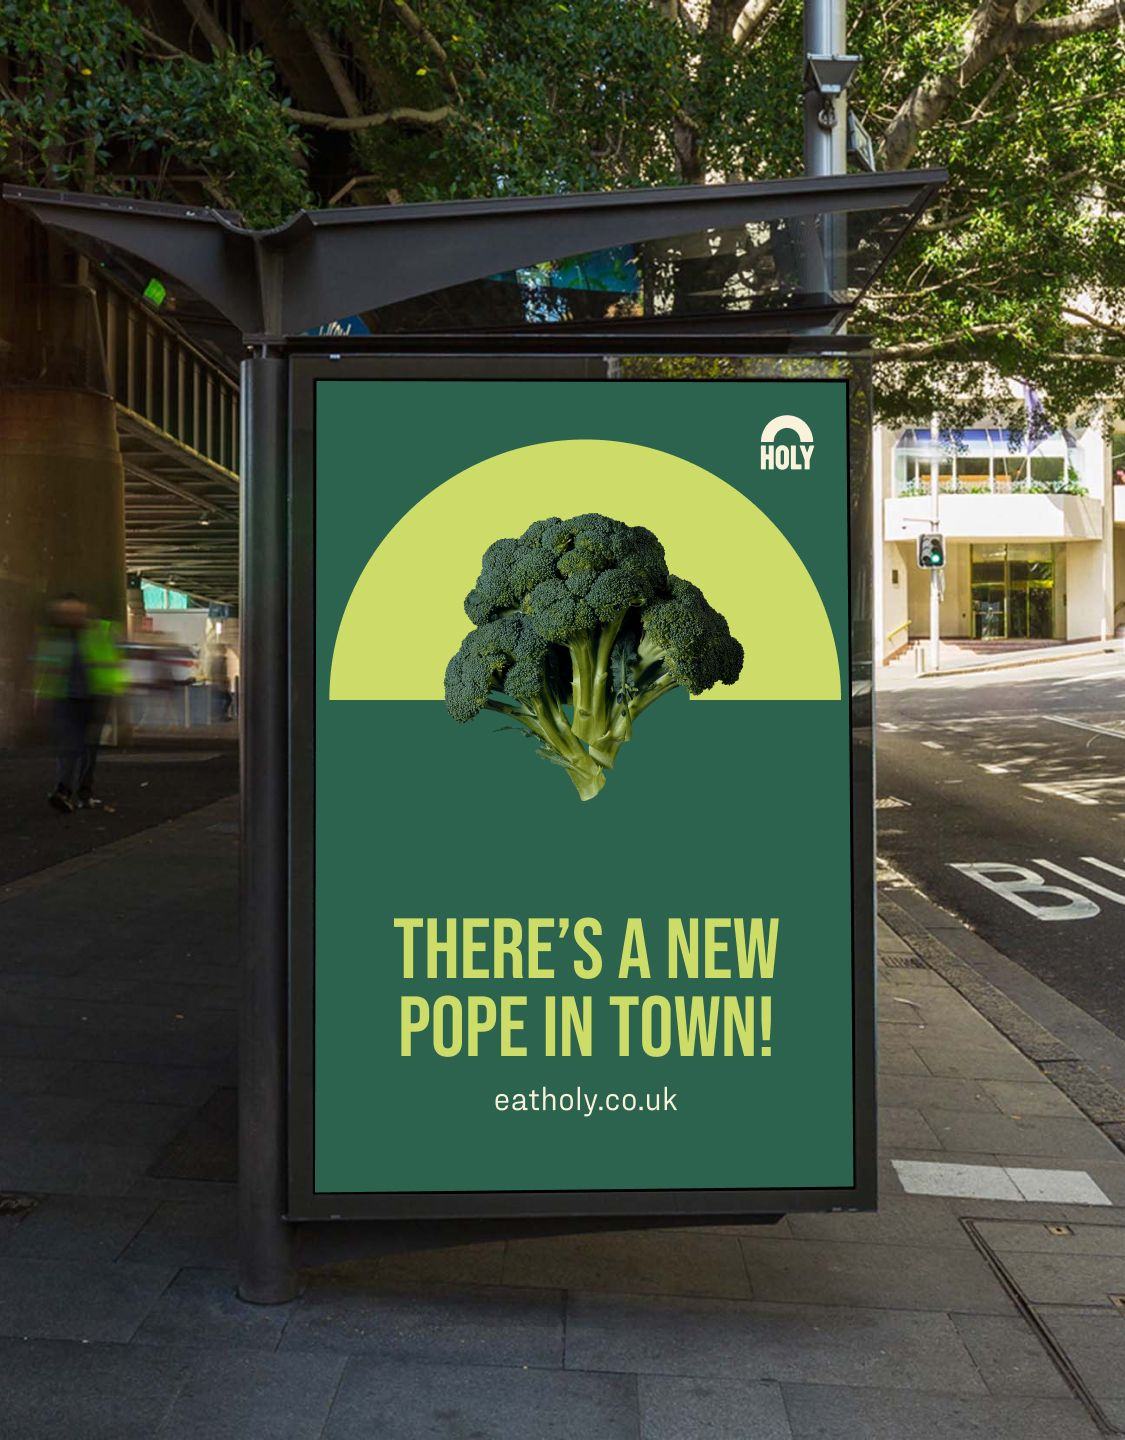 Holy vegan food delivery service street banner ad